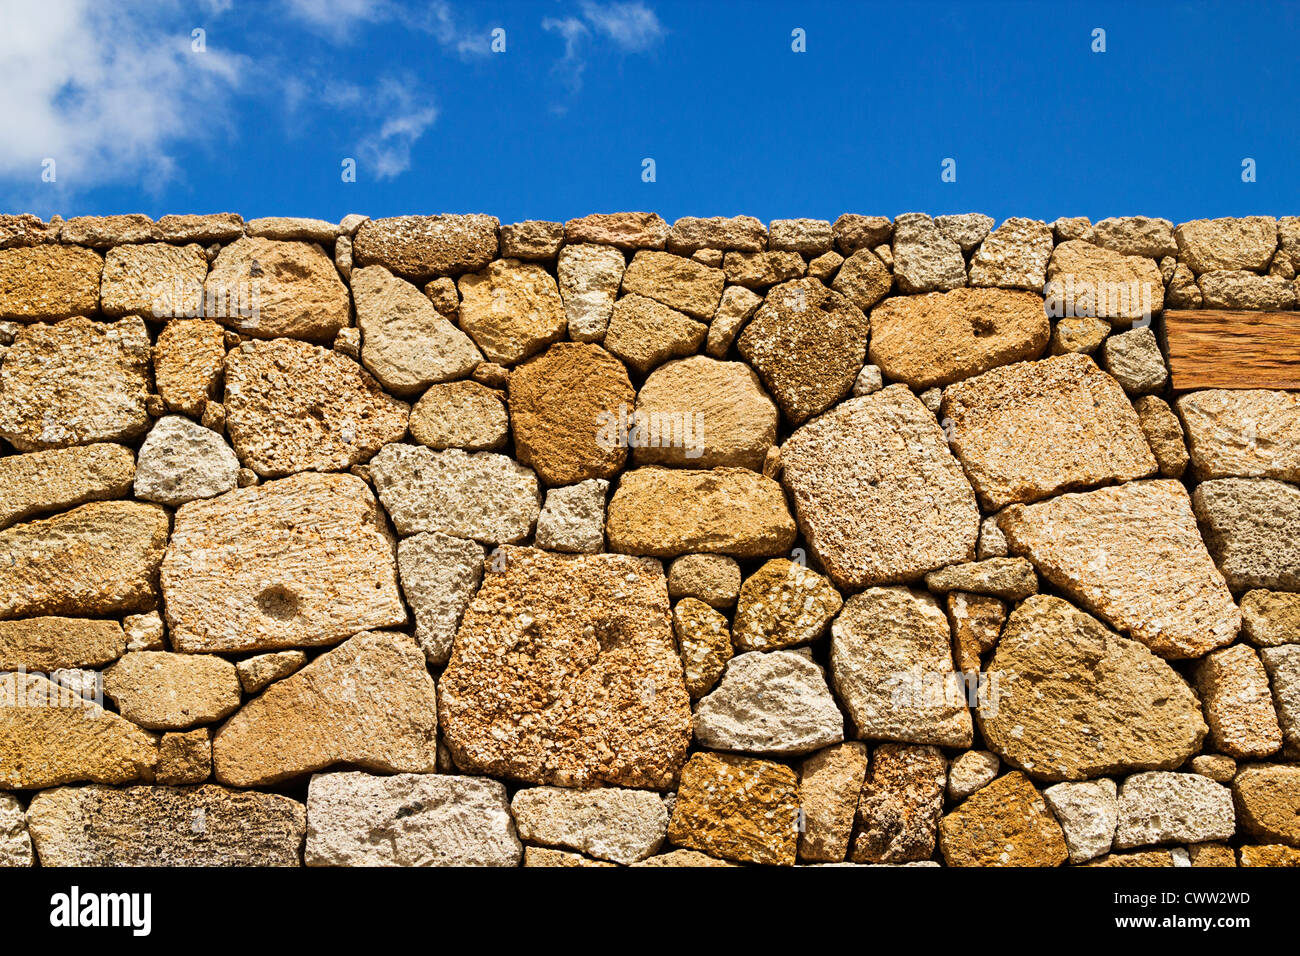 Dry Stone wall made from volcanic rocks on Tenerife, Canart Islands, Spain Stock Photo